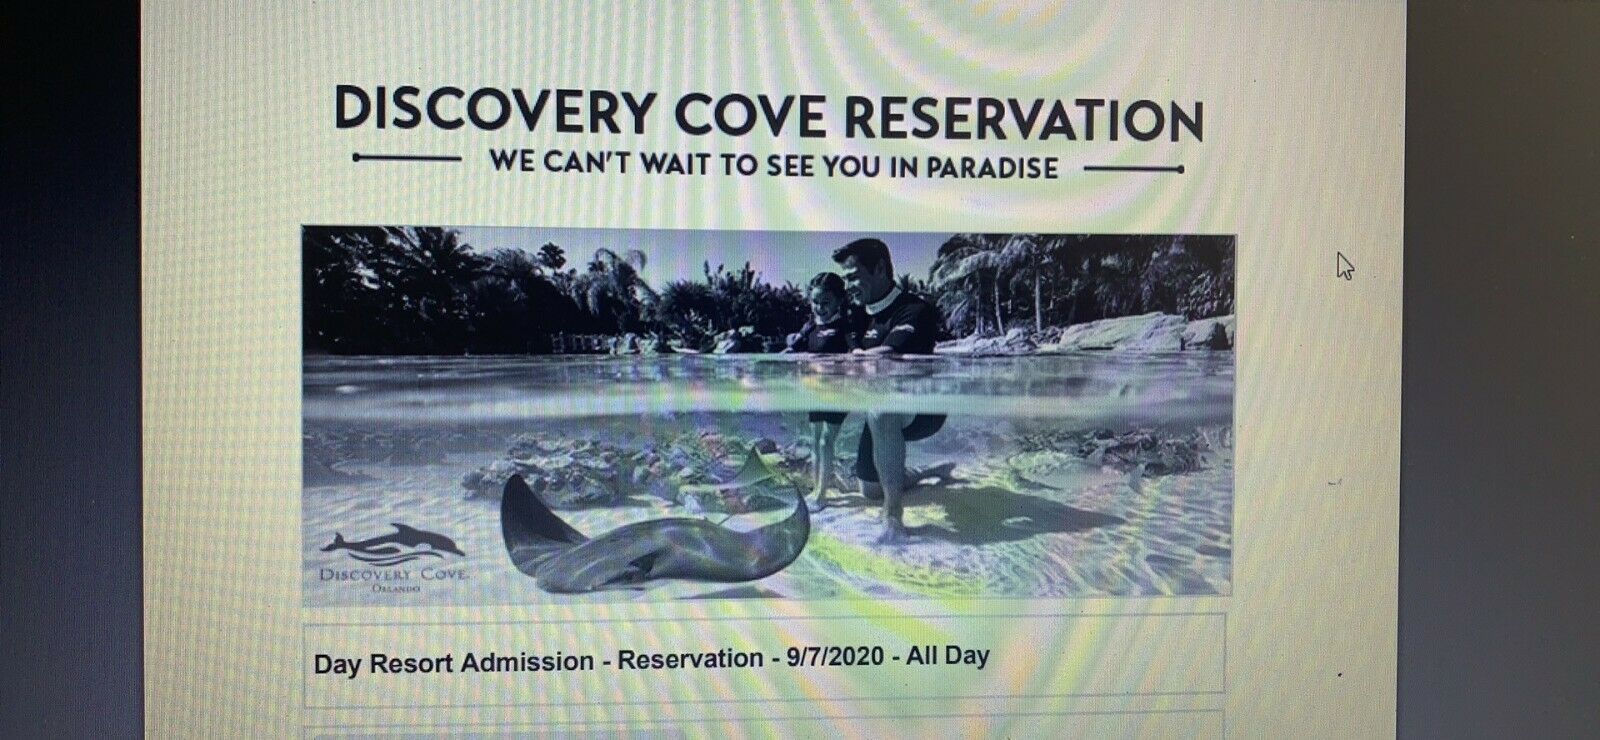 Two Tickets To Discover Cove In Orlando - Admission Date 09/07/2020